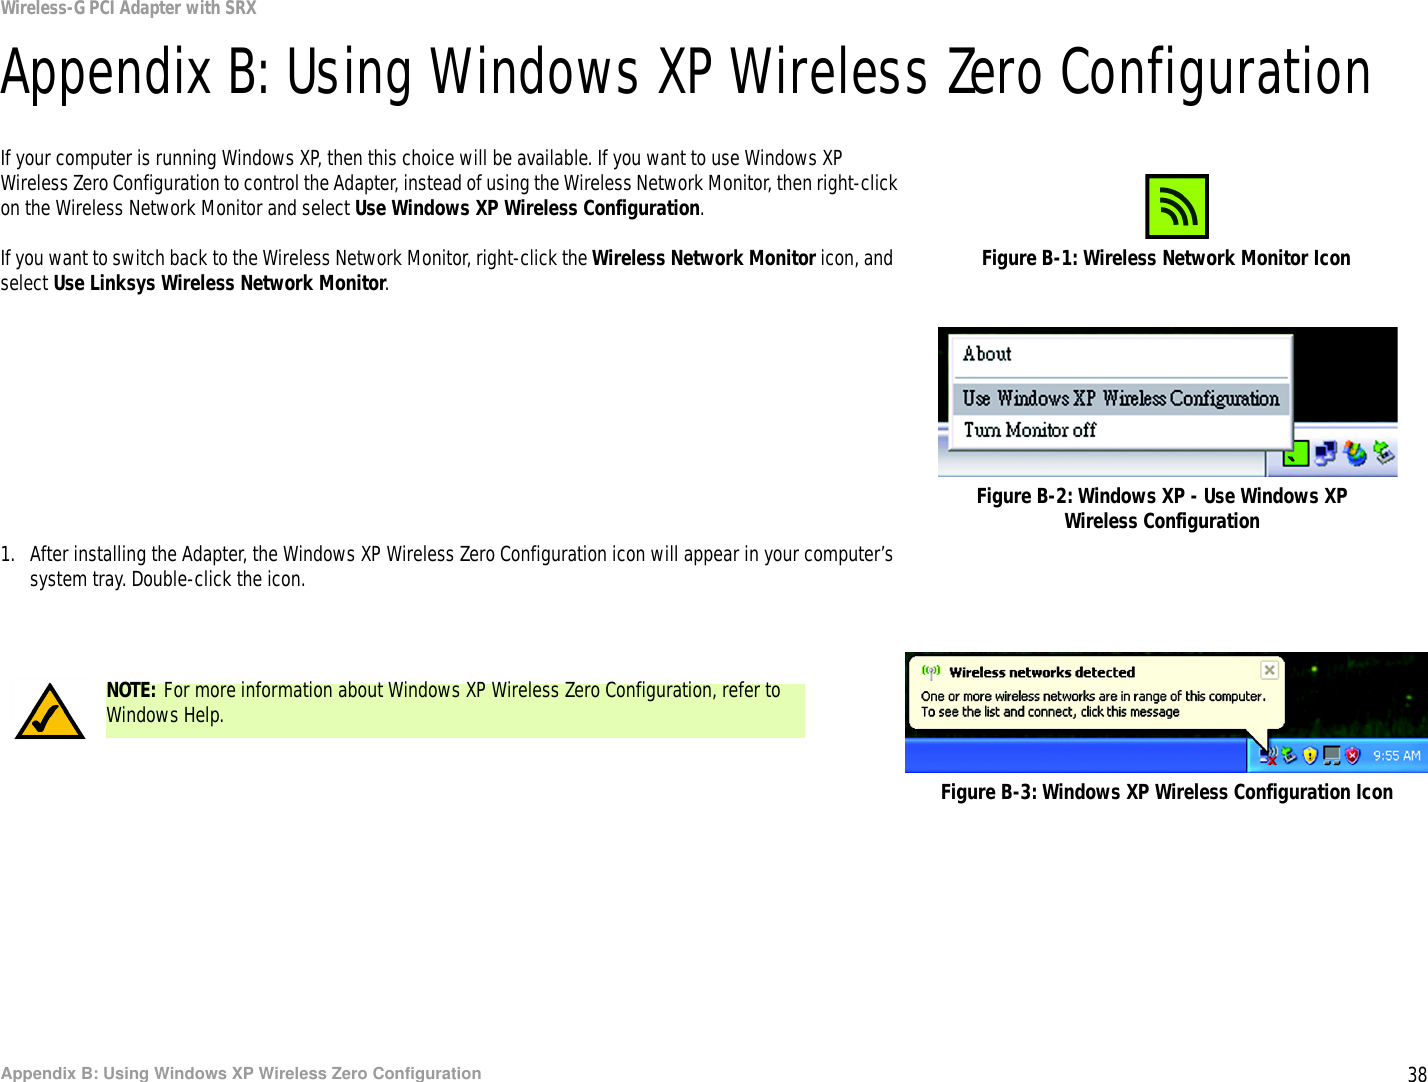 38Appendix B: Using Windows XP Wireless Zero ConfigurationWireless-G PCI Adapter with SRXAppendix B: Using Windows XP Wireless Zero ConfigurationIf your computer is running Windows XP, then this choice will be available. If you want to use Windows XP Wireless Zero Configuration to control the Adapter, instead of using the Wireless Network Monitor, then right-click on the Wireless Network Monitor and select Use Windows XP Wireless Configuration. If you want to switch back to the Wireless Network Monitor, right-click the Wireless Network Monitor icon, and select Use Linksys Wireless Network Monitor.1. After installing the Adapter, the Windows XP Wireless Zero Configuration icon will appear in your computer’s system tray. Double-click the icon. Figure B-1: Wireless Network Monitor IconFigure B-2: Windows XP - Use Windows XP Wireless ConfigurationNOTE: For more information about Windows XP Wireless Zero Configuration, refer to Windows Help.Figure B-3: Windows XP Wireless Configuration Icon